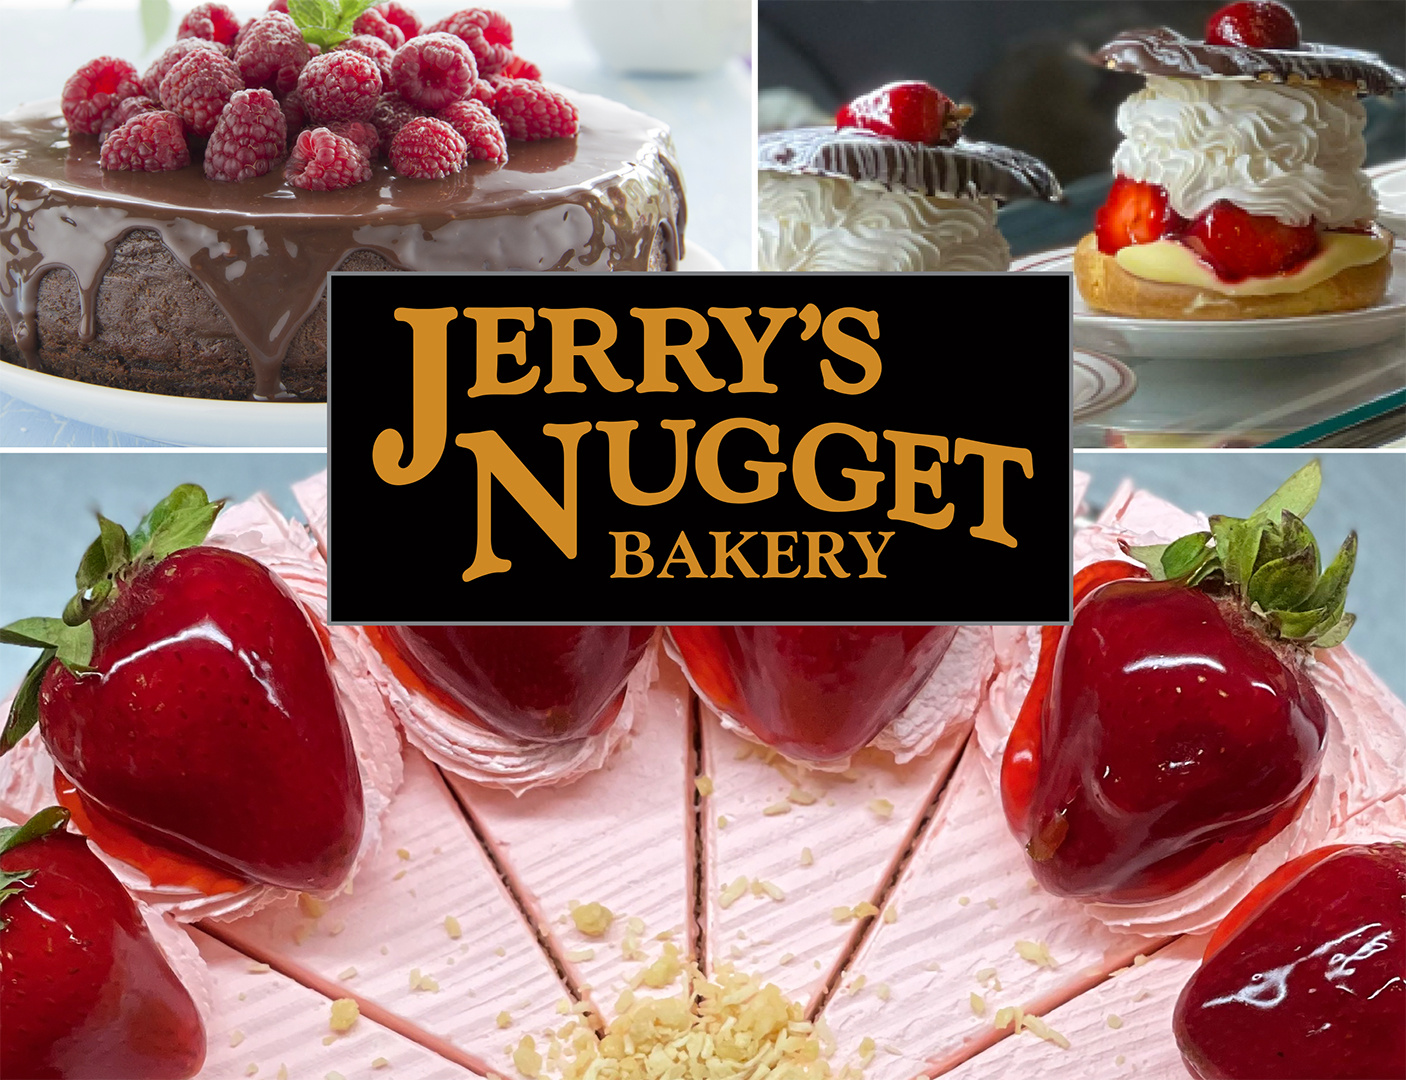 Jerry's Nugget Bakery